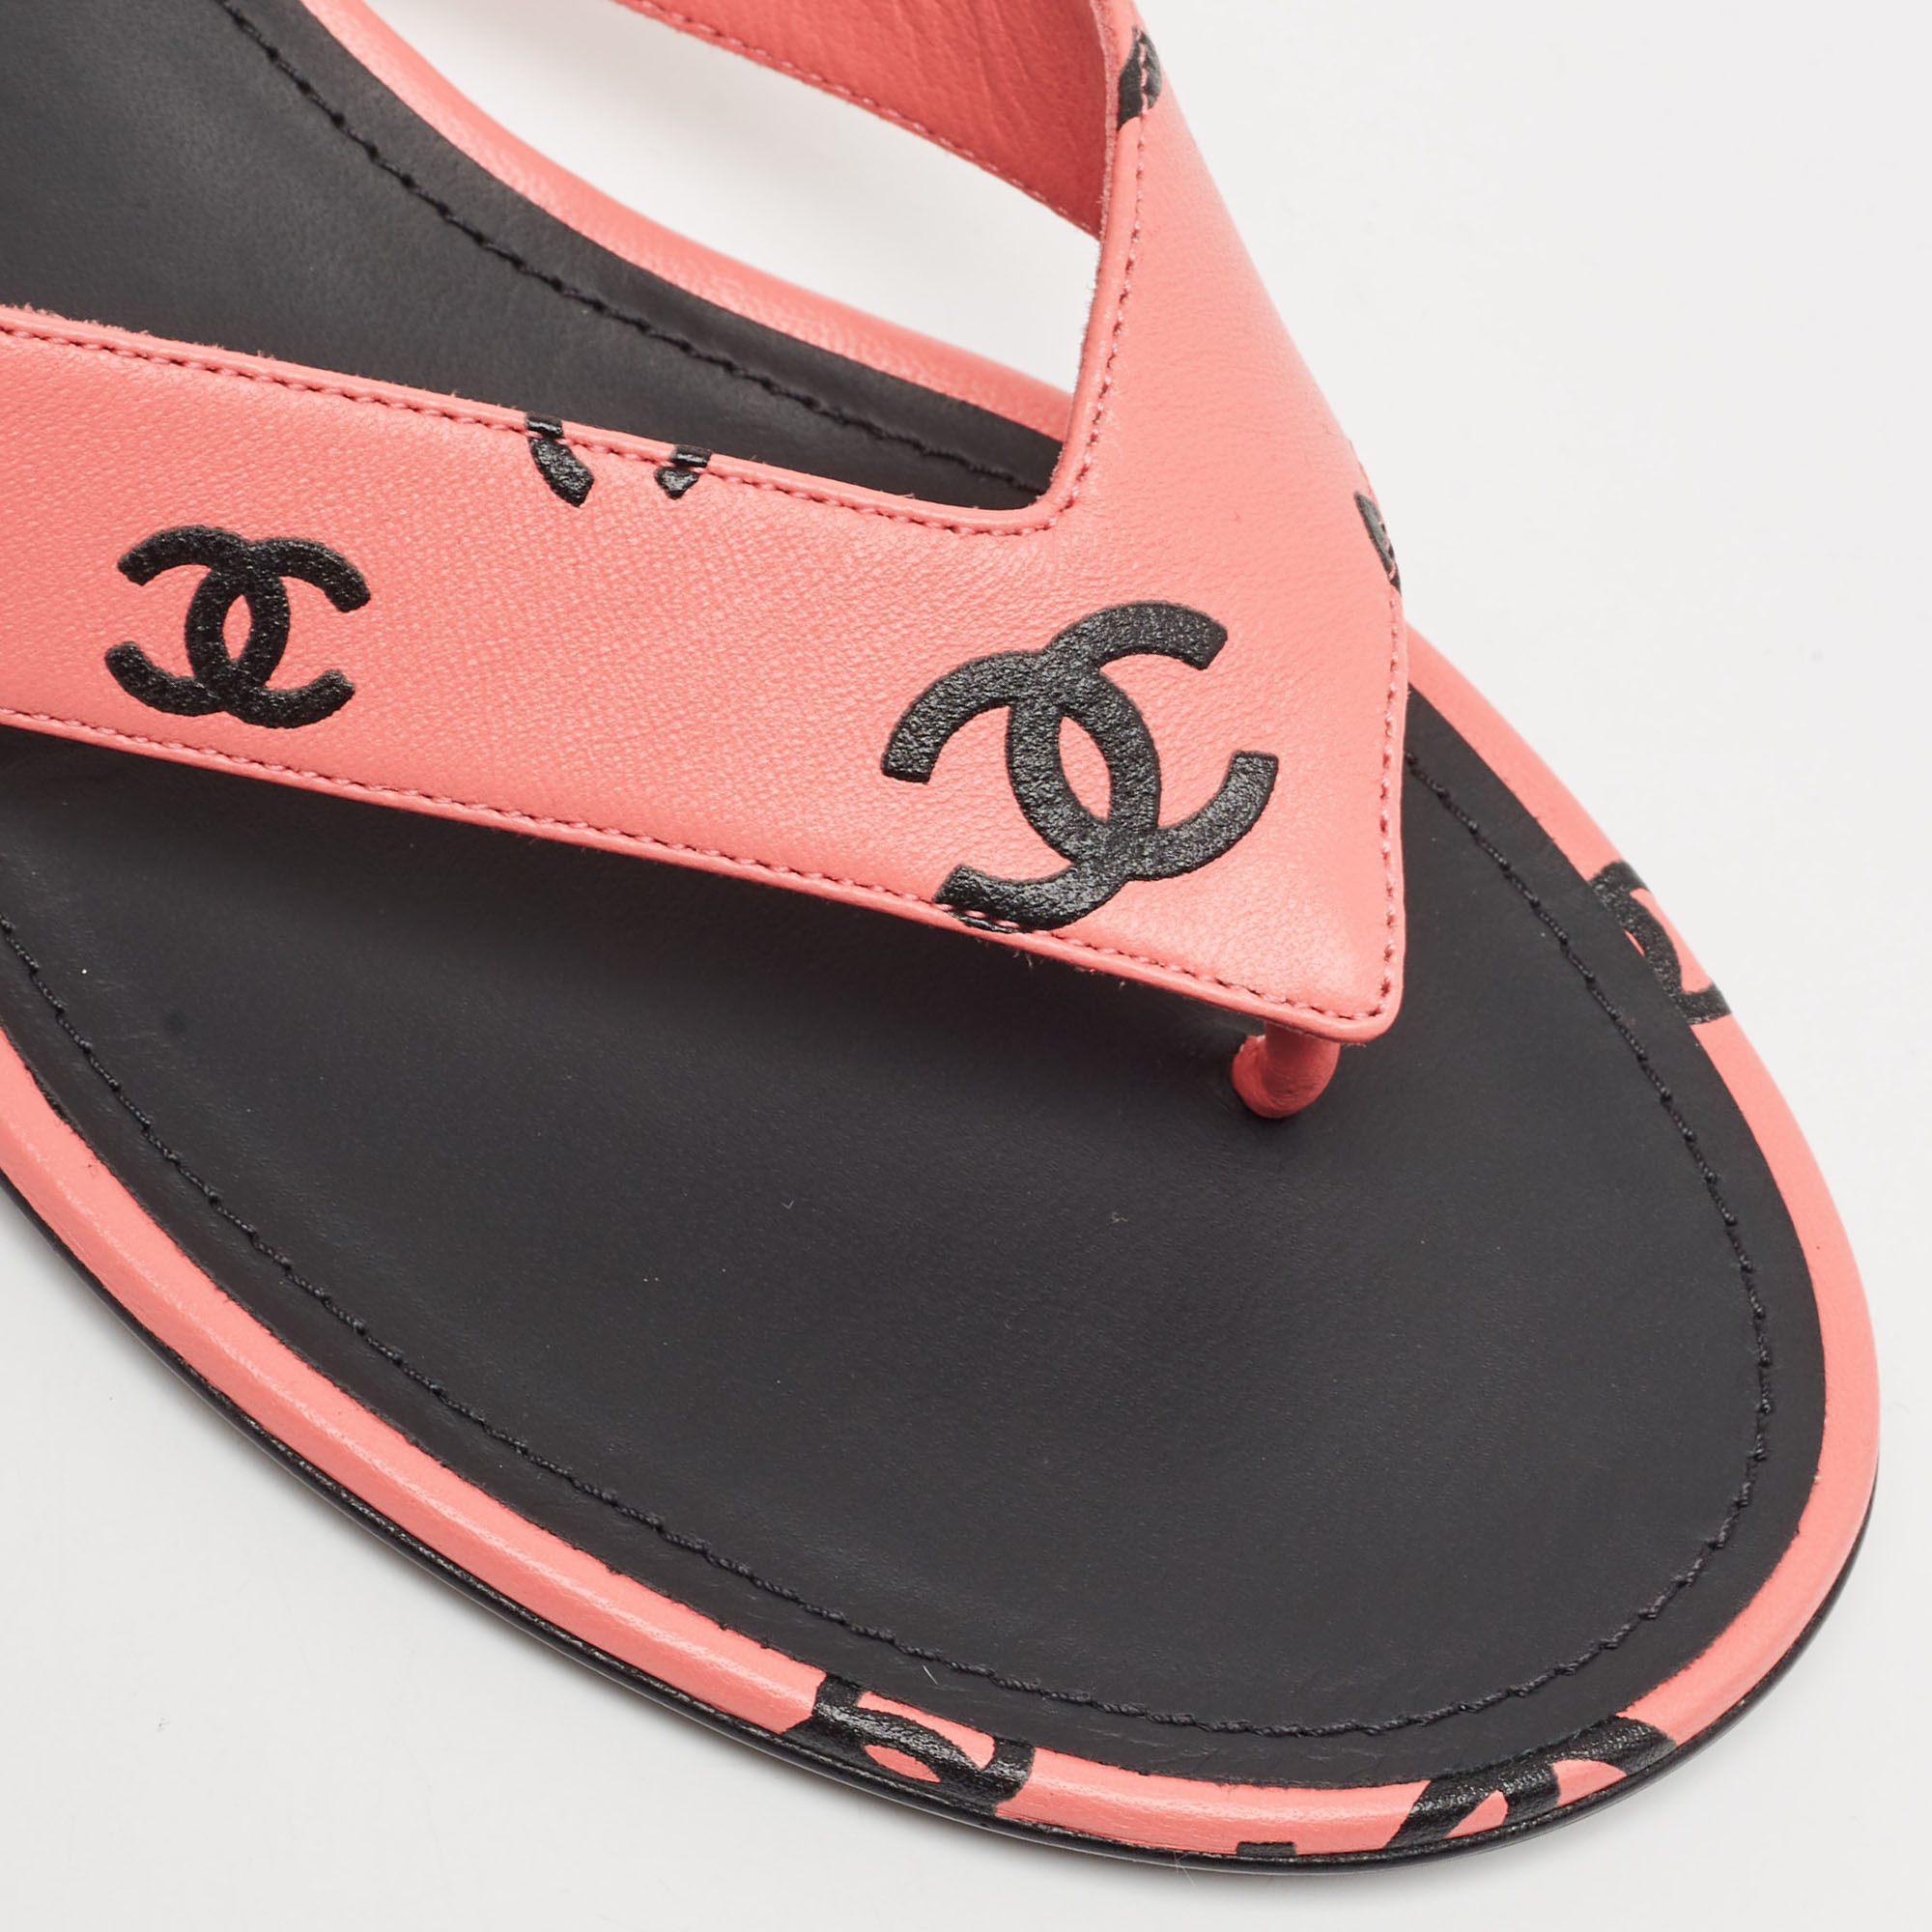 Black Chanel thong sandals with pink toes : r/thongsandals